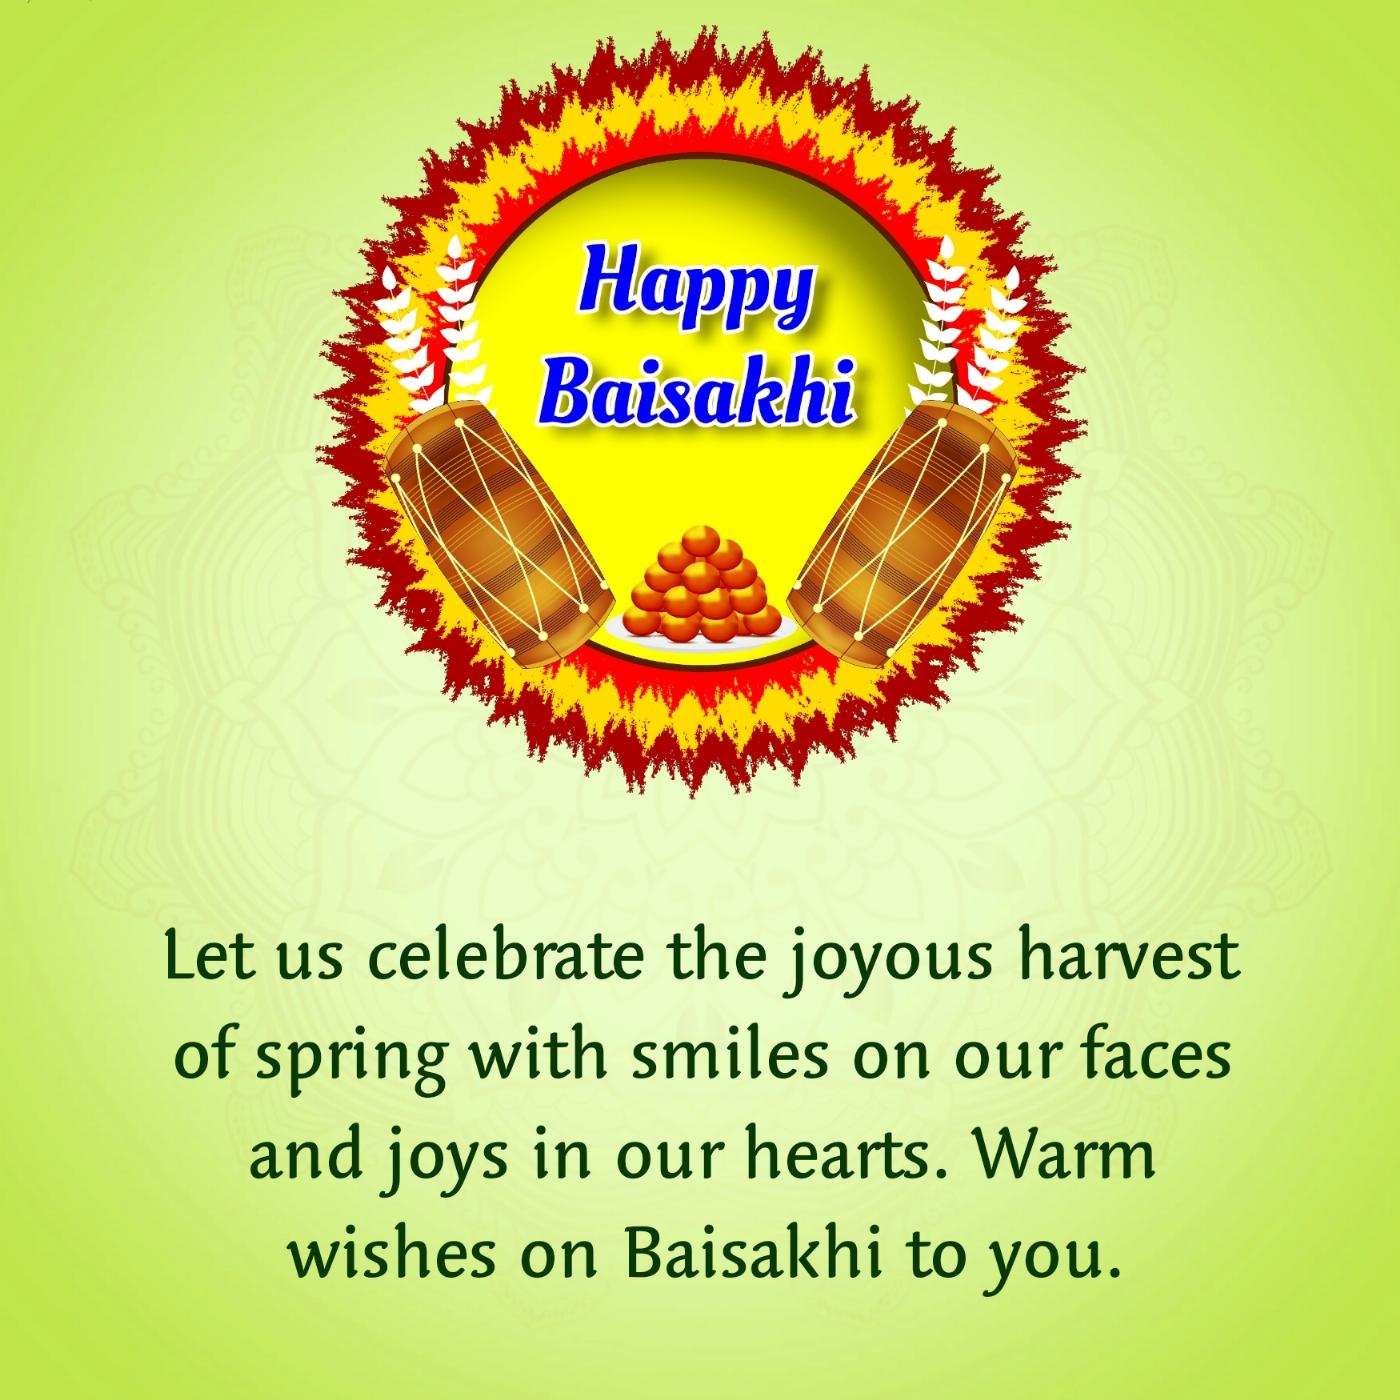 Let us celebrate the joyous harvest of spring with smiles